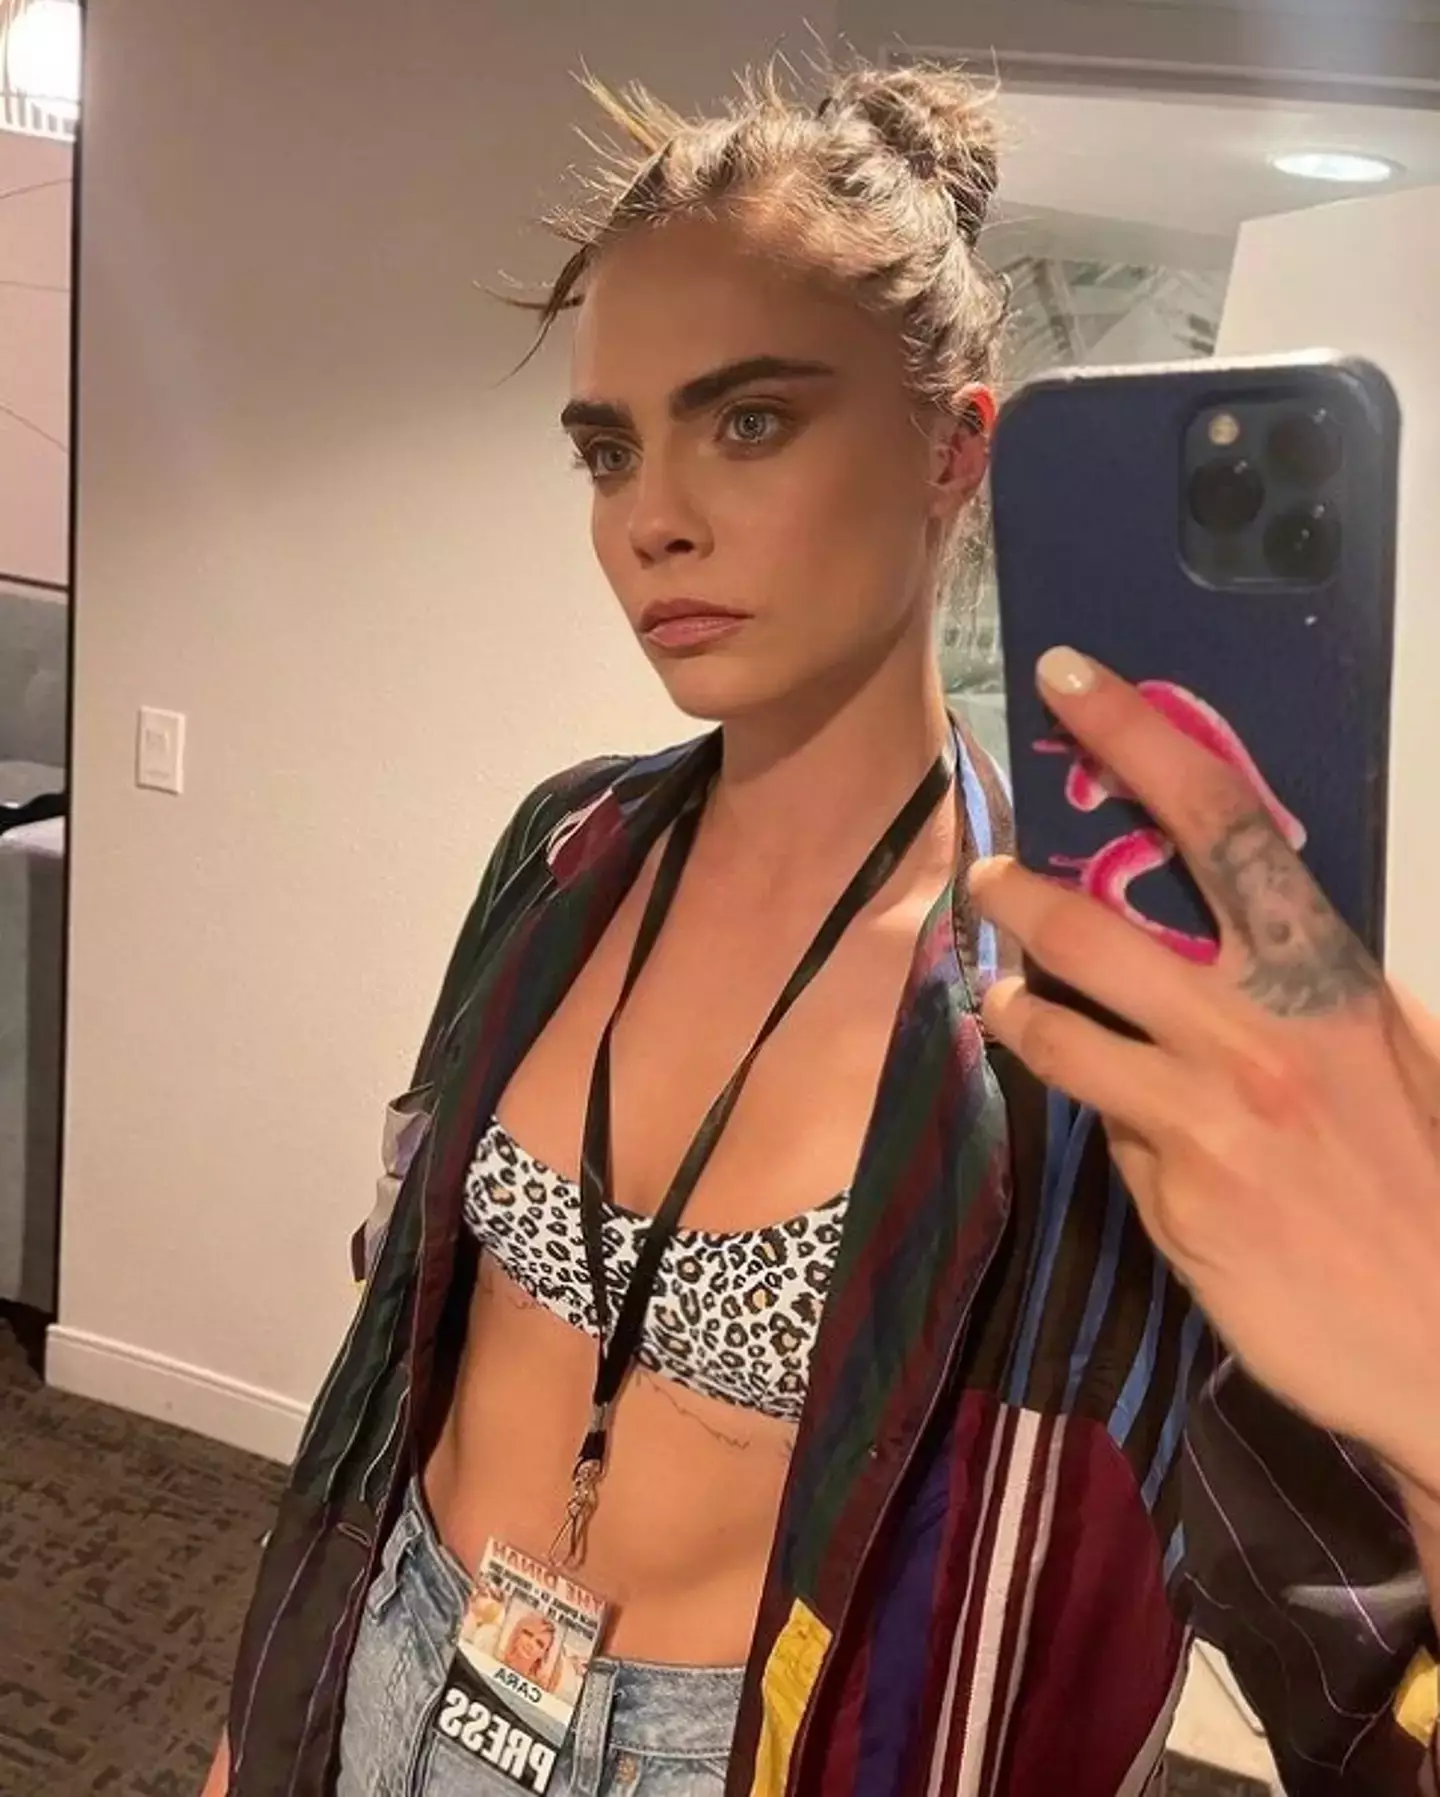 She said her 'heart is broken' following the fire. (Instagram/@caradelevingne)